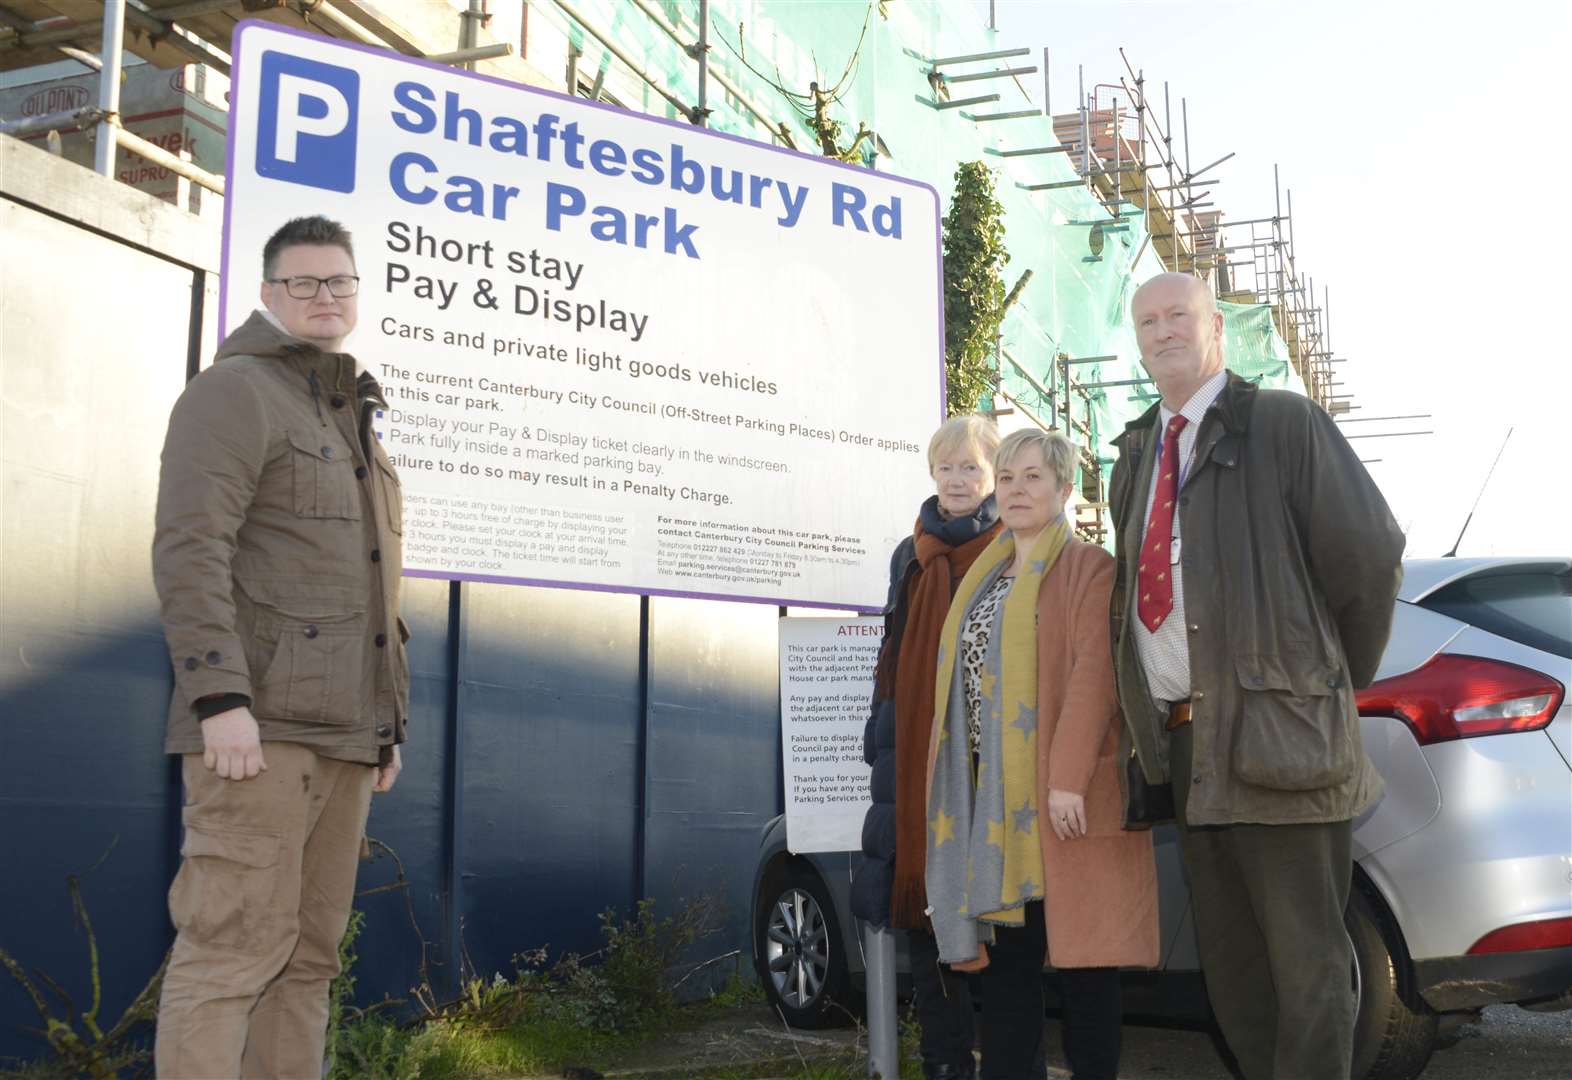 Cllr Chris Cornell, Cllr Ann Kenny, local business owner Alison Clarke and Cllr Ashley Clarke are outraged over proposed charges